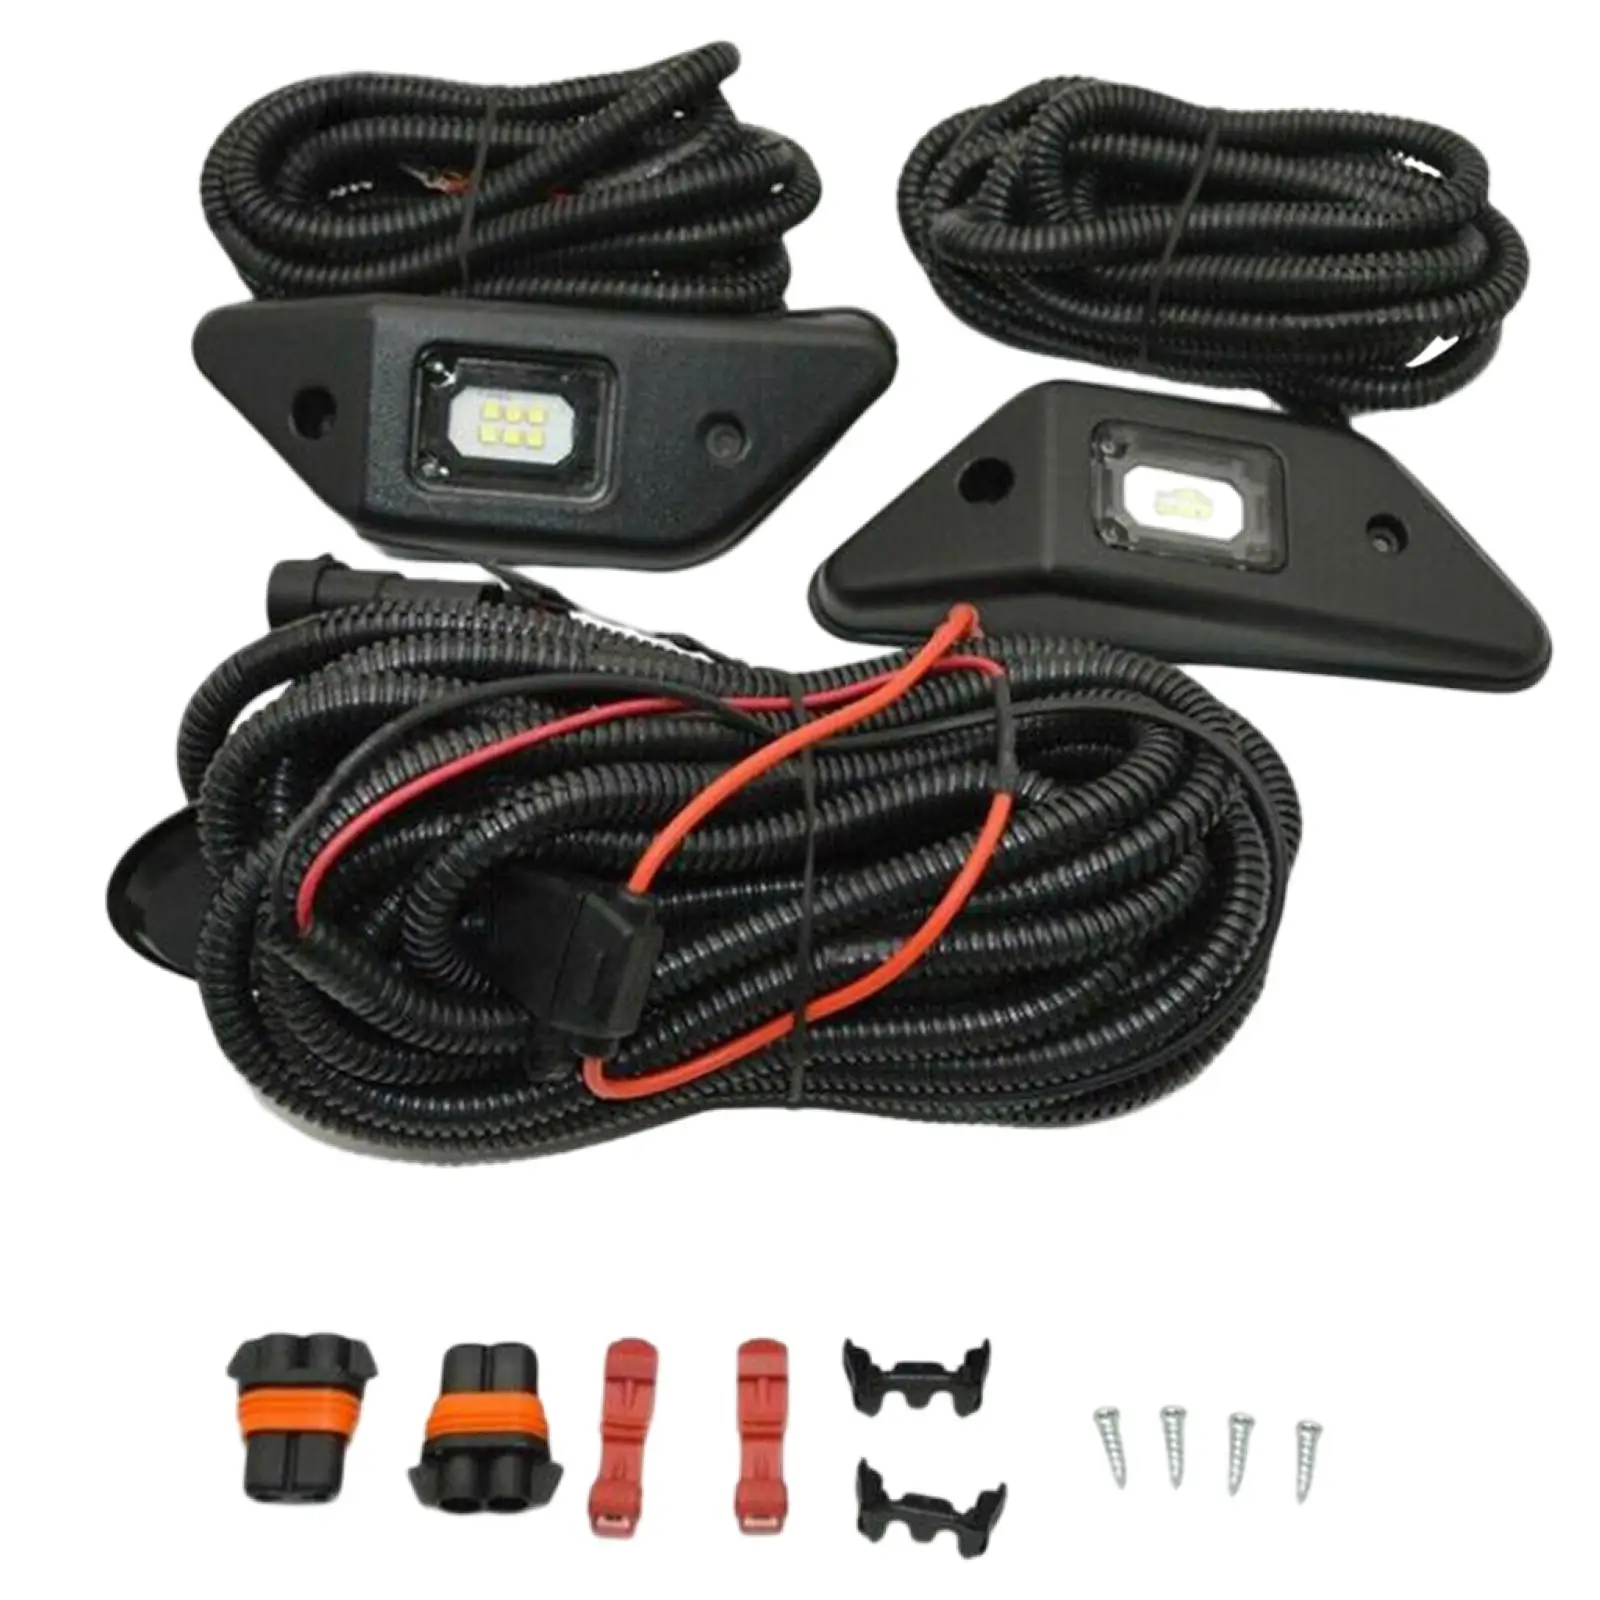   Lighting Kit, 000163418016-34187 Wiring Harness  for    Stable and has great performance while using.